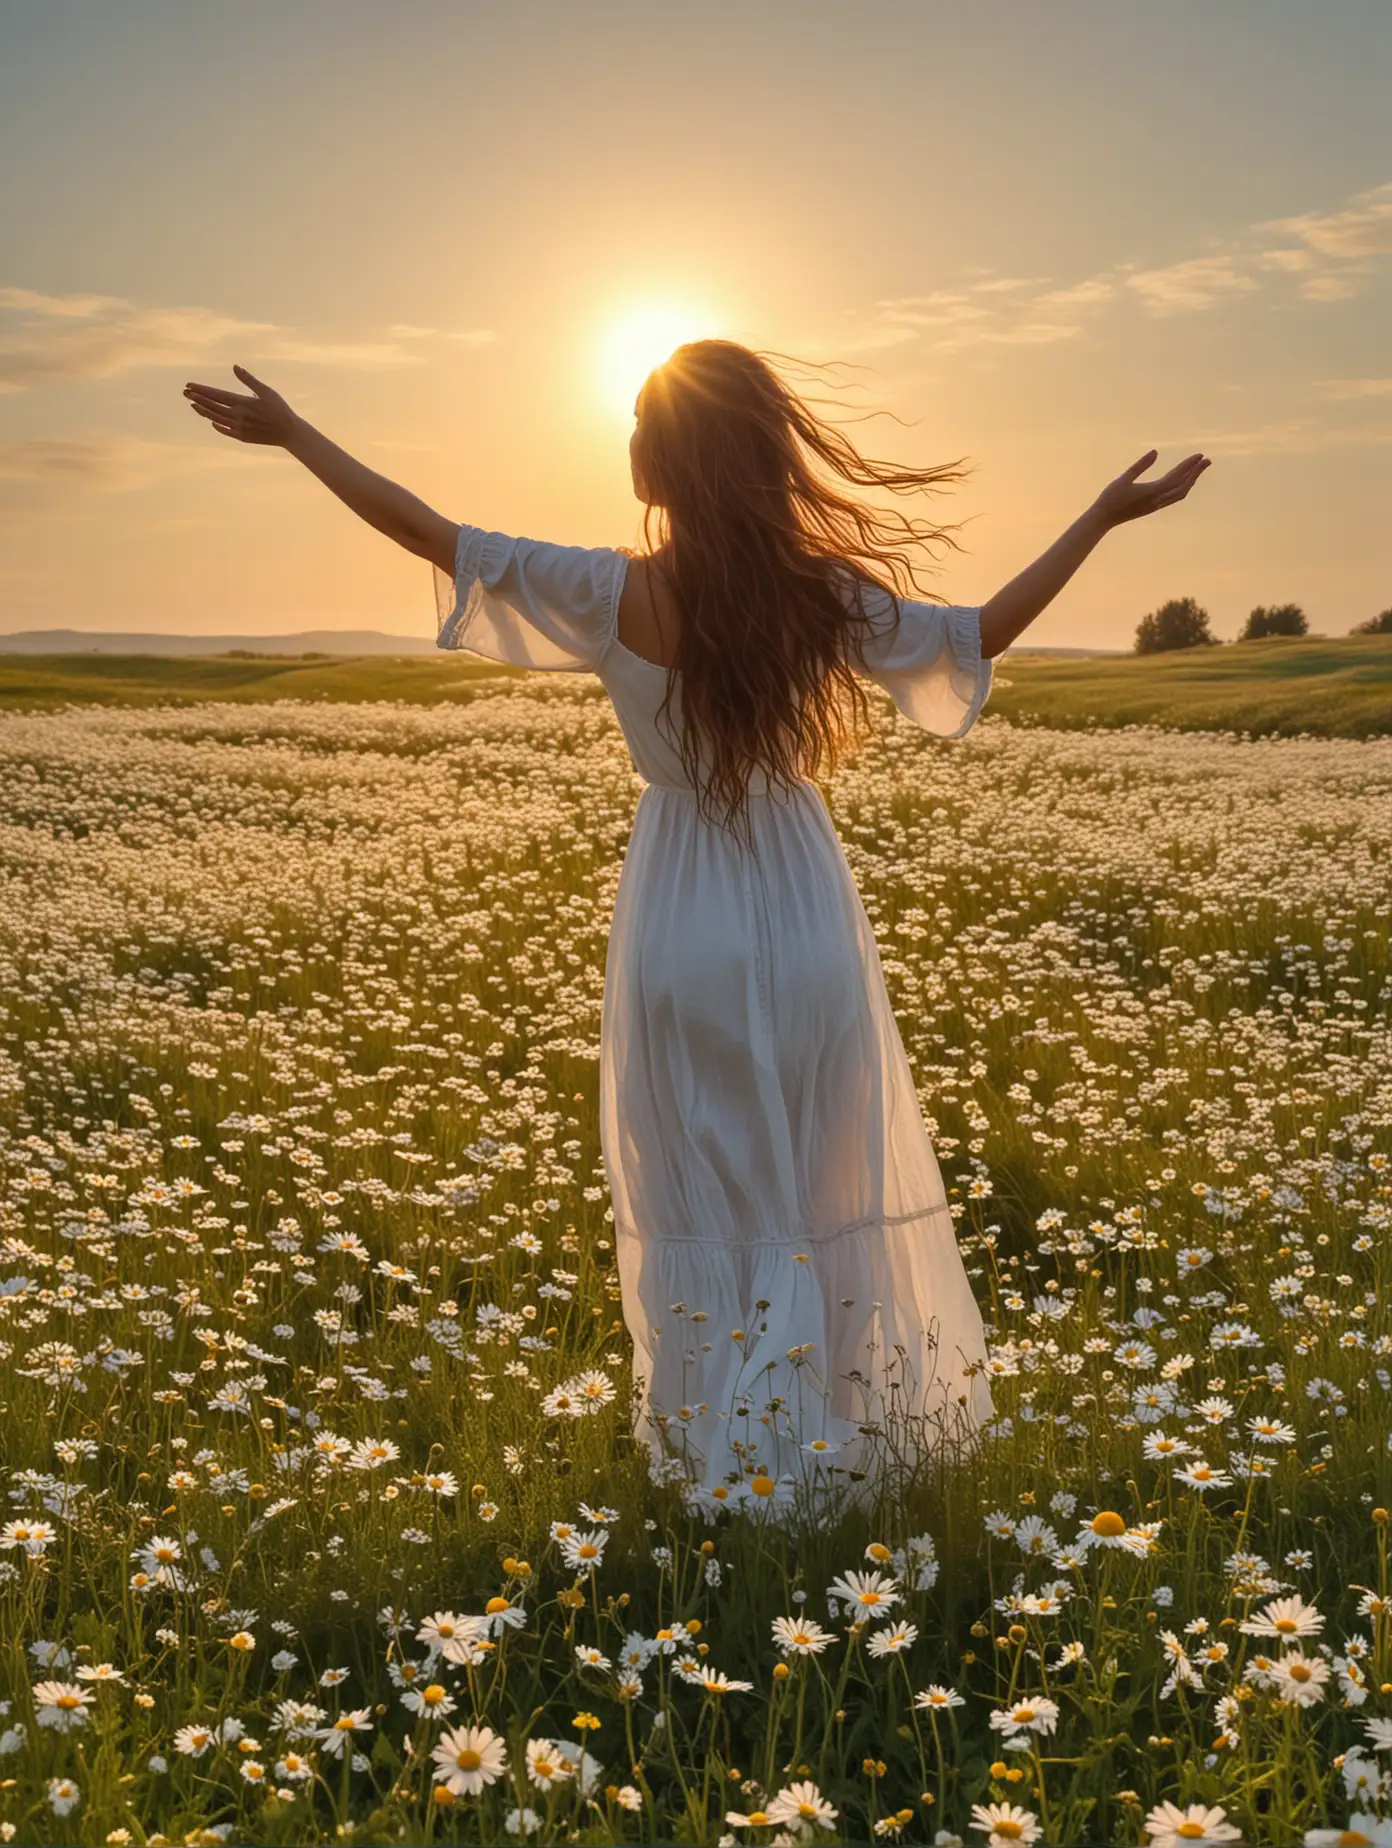 Young-Woman-in-Field-with-Daisies-Holding-Golden-Spiral